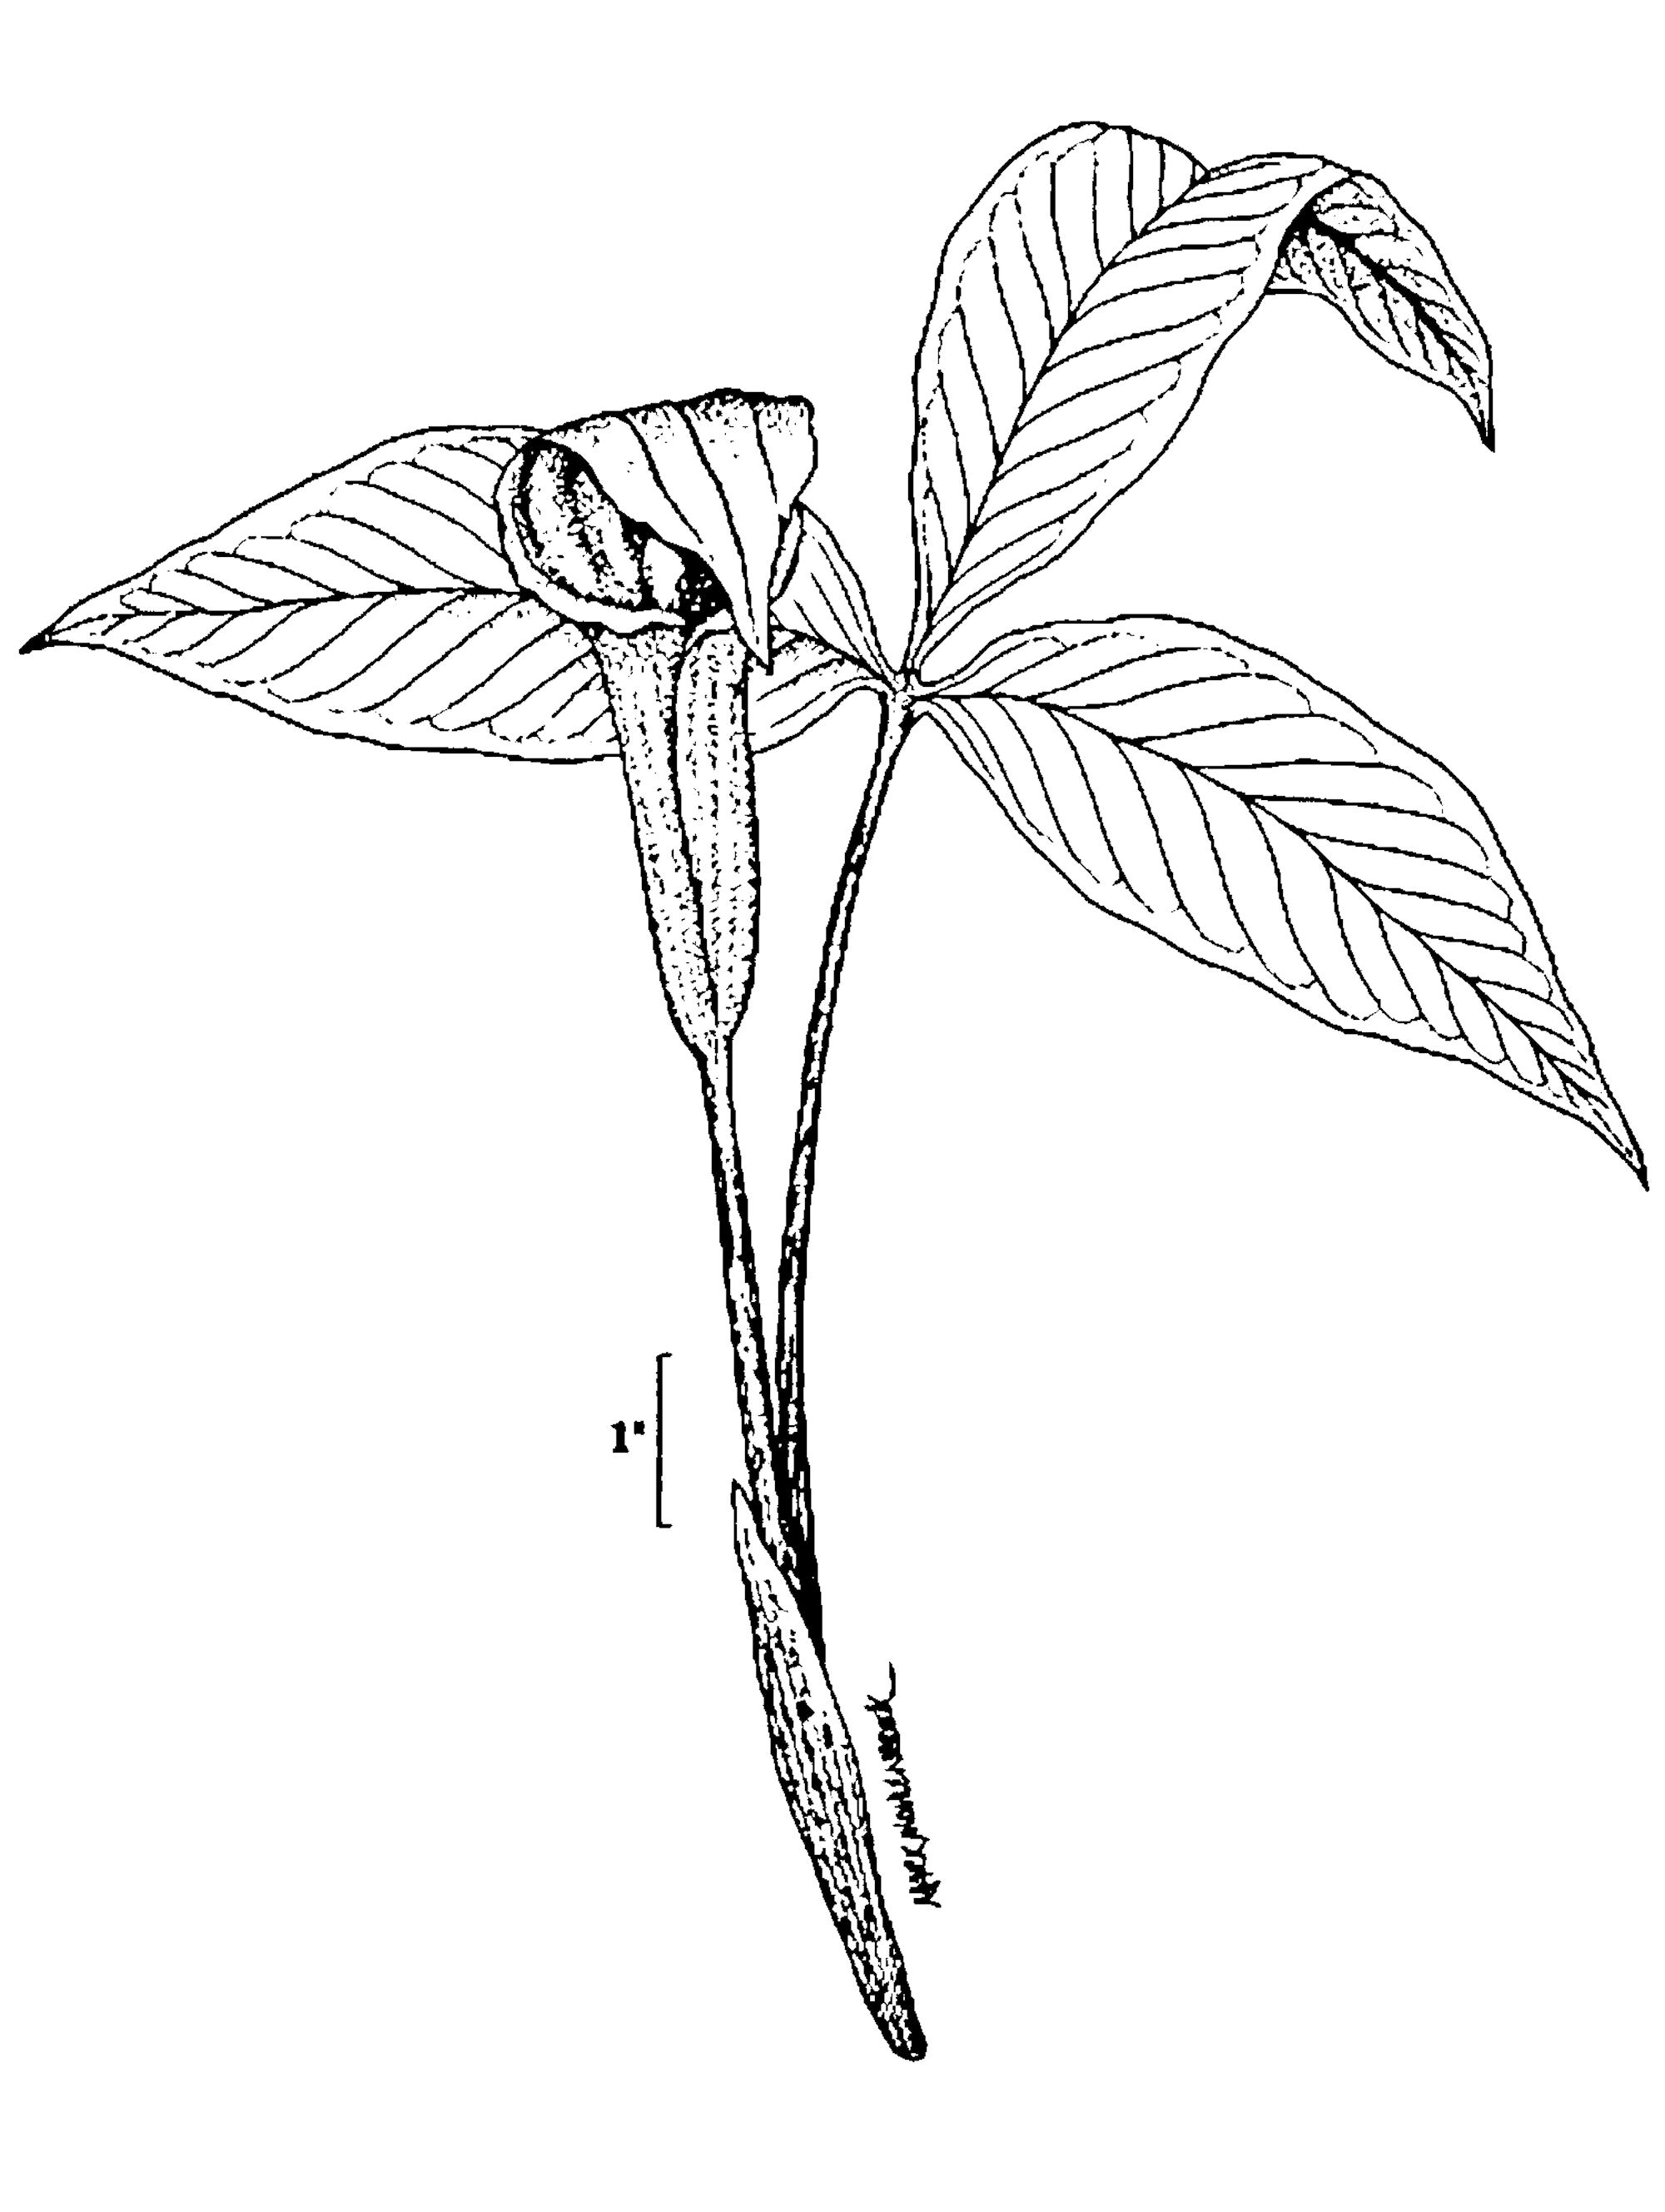 Drawing of Jack-in-the-Pulpit from Field office illustrated guide.